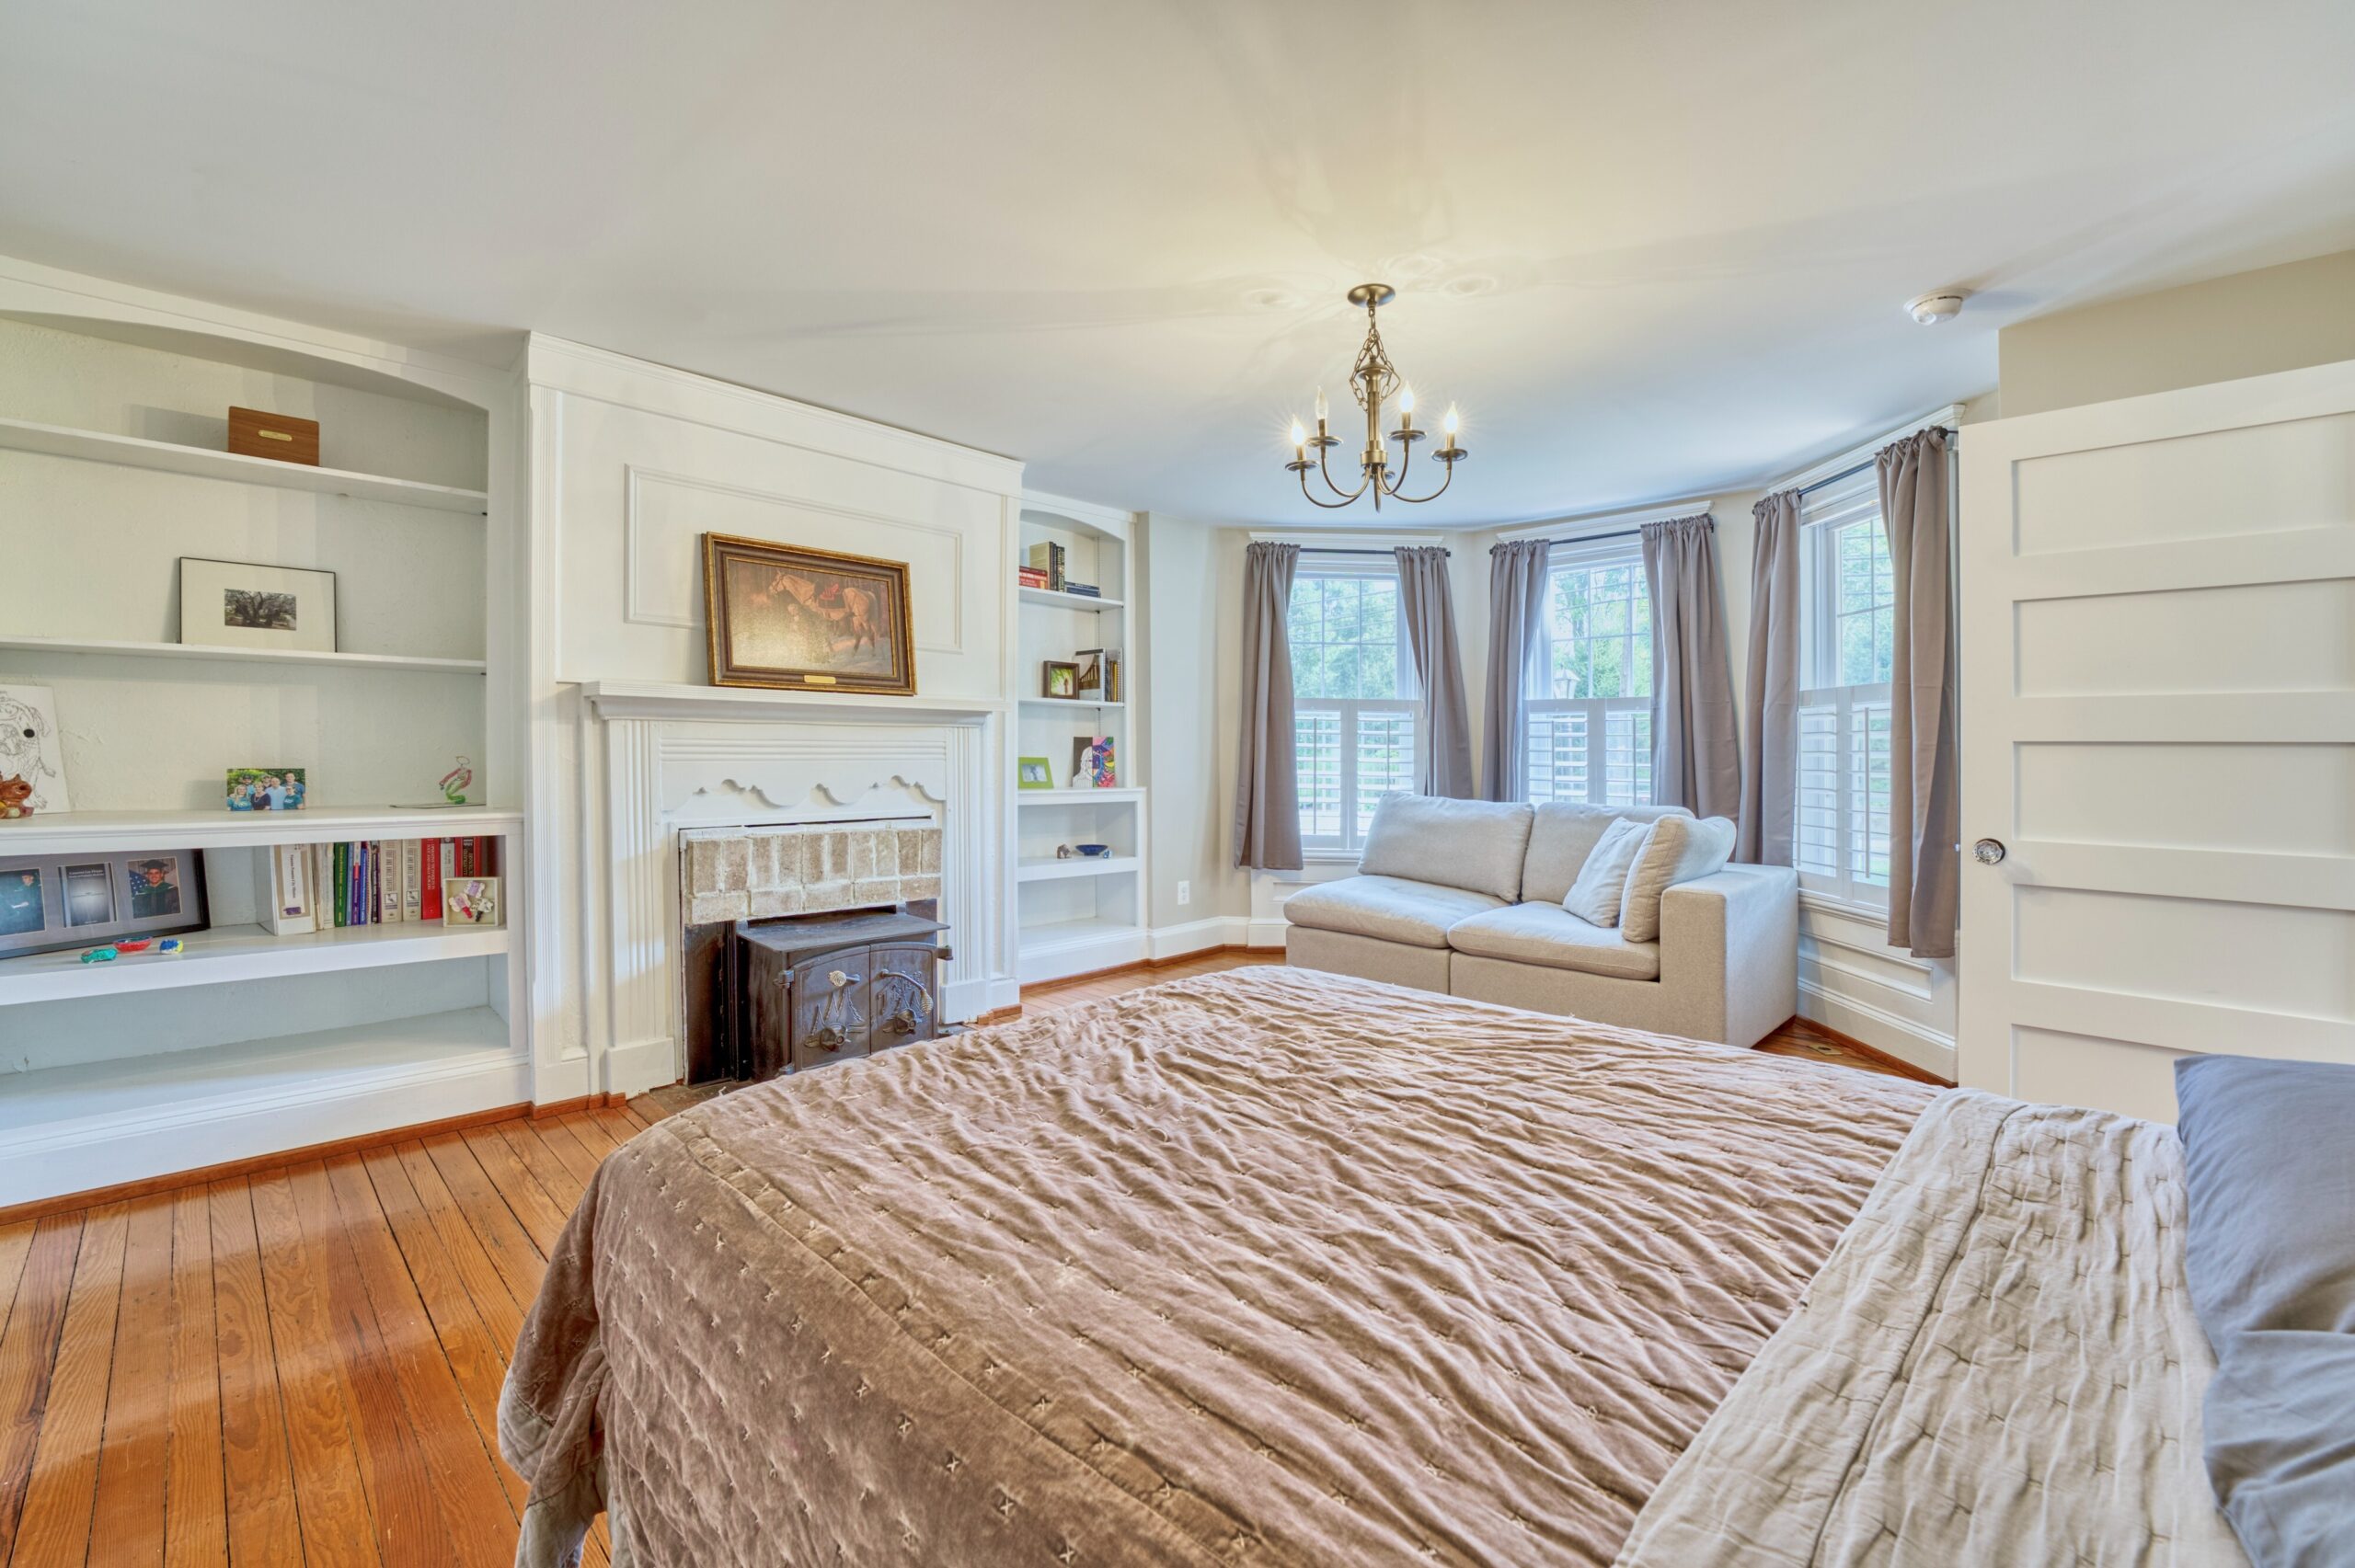 dramatic large bedroom in historic home in Hamilton, VA with built-in bookshelves on either side of a fireplace, chandelier and lounge chair in window nook. 